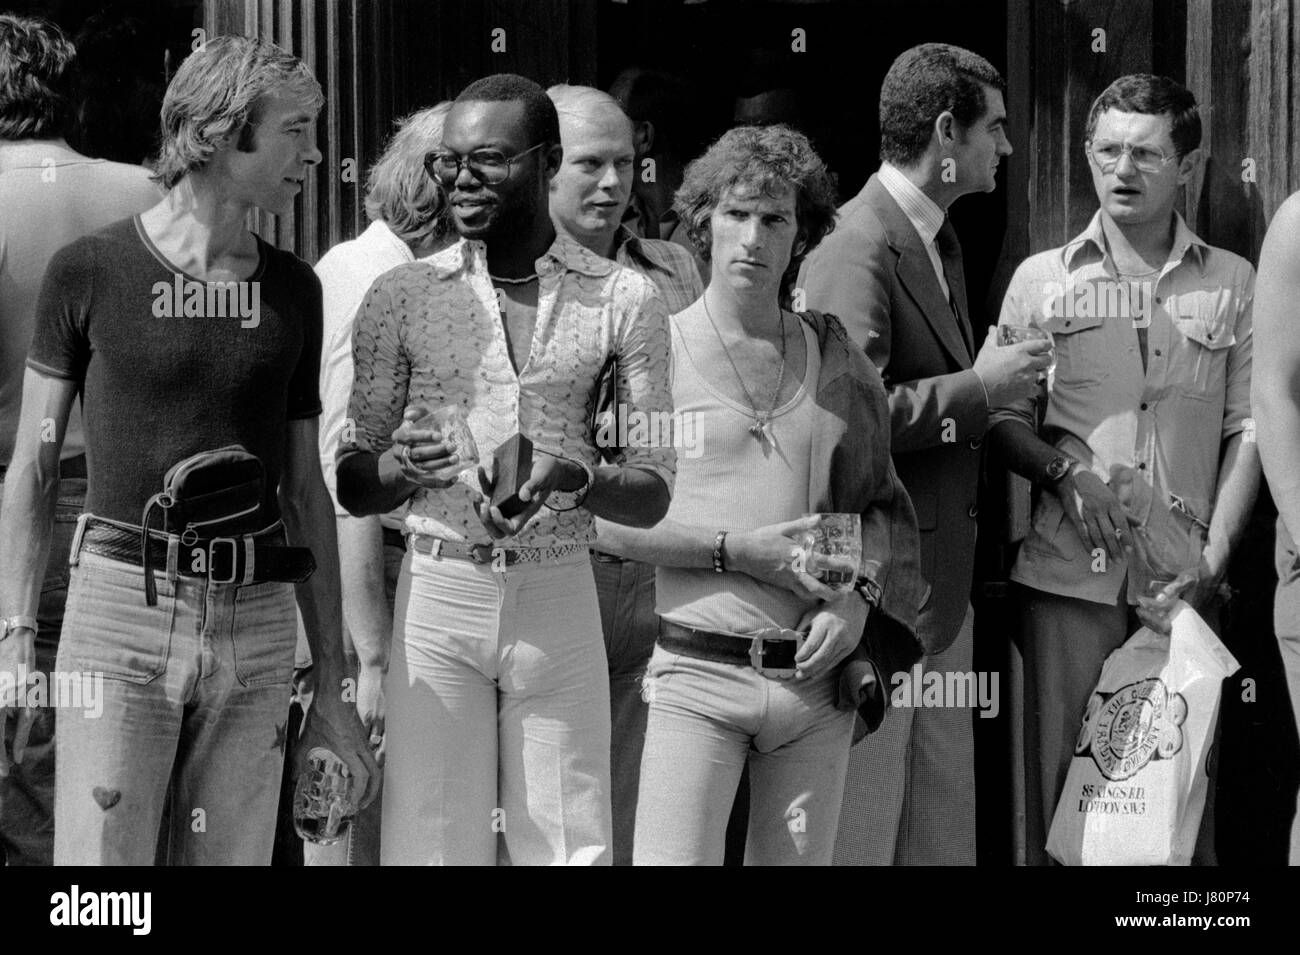 1970s fashion very tight jeans trousers. Gay scene Kings Road Chelsea, London. The Markham Arms, a well know gay pub and meeting place in the Kings Road, Chelsea. 70s UK HOMER SYKES Stock Photo